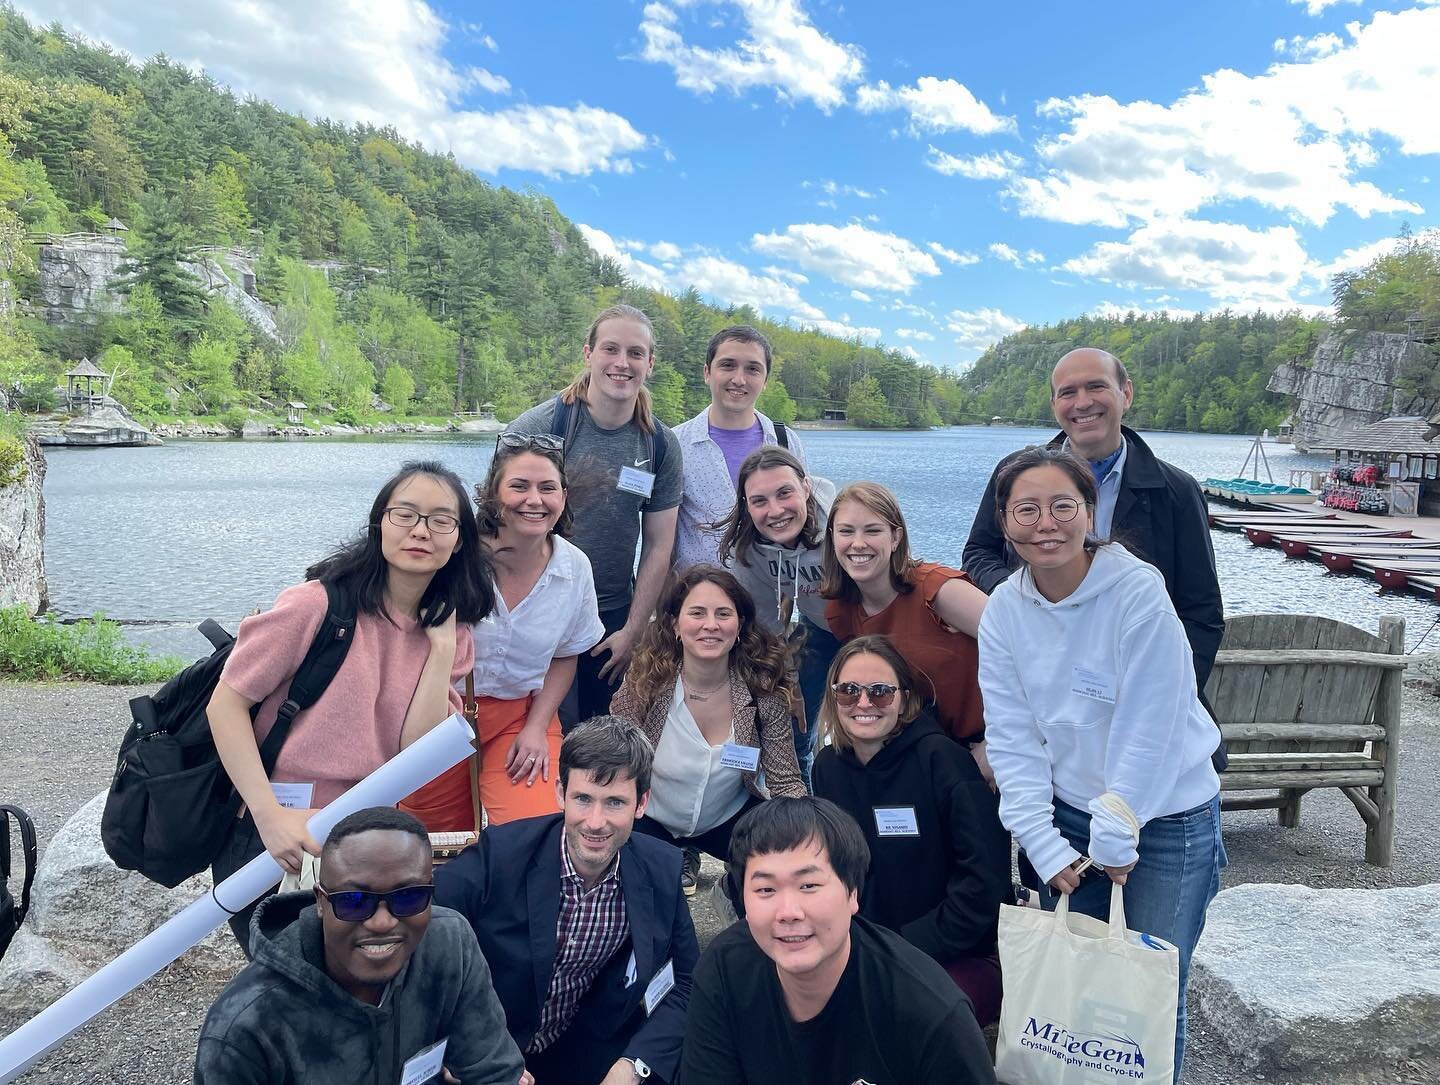 Very successful Columbia University Physiology and Cellular Biophysics Department Retreat! @mohonkmountainhouse @columbia Top notch science in a gorgeous locale. Congrats to all our speakers, poster presenters and organizers!  #retreattomoveforward #